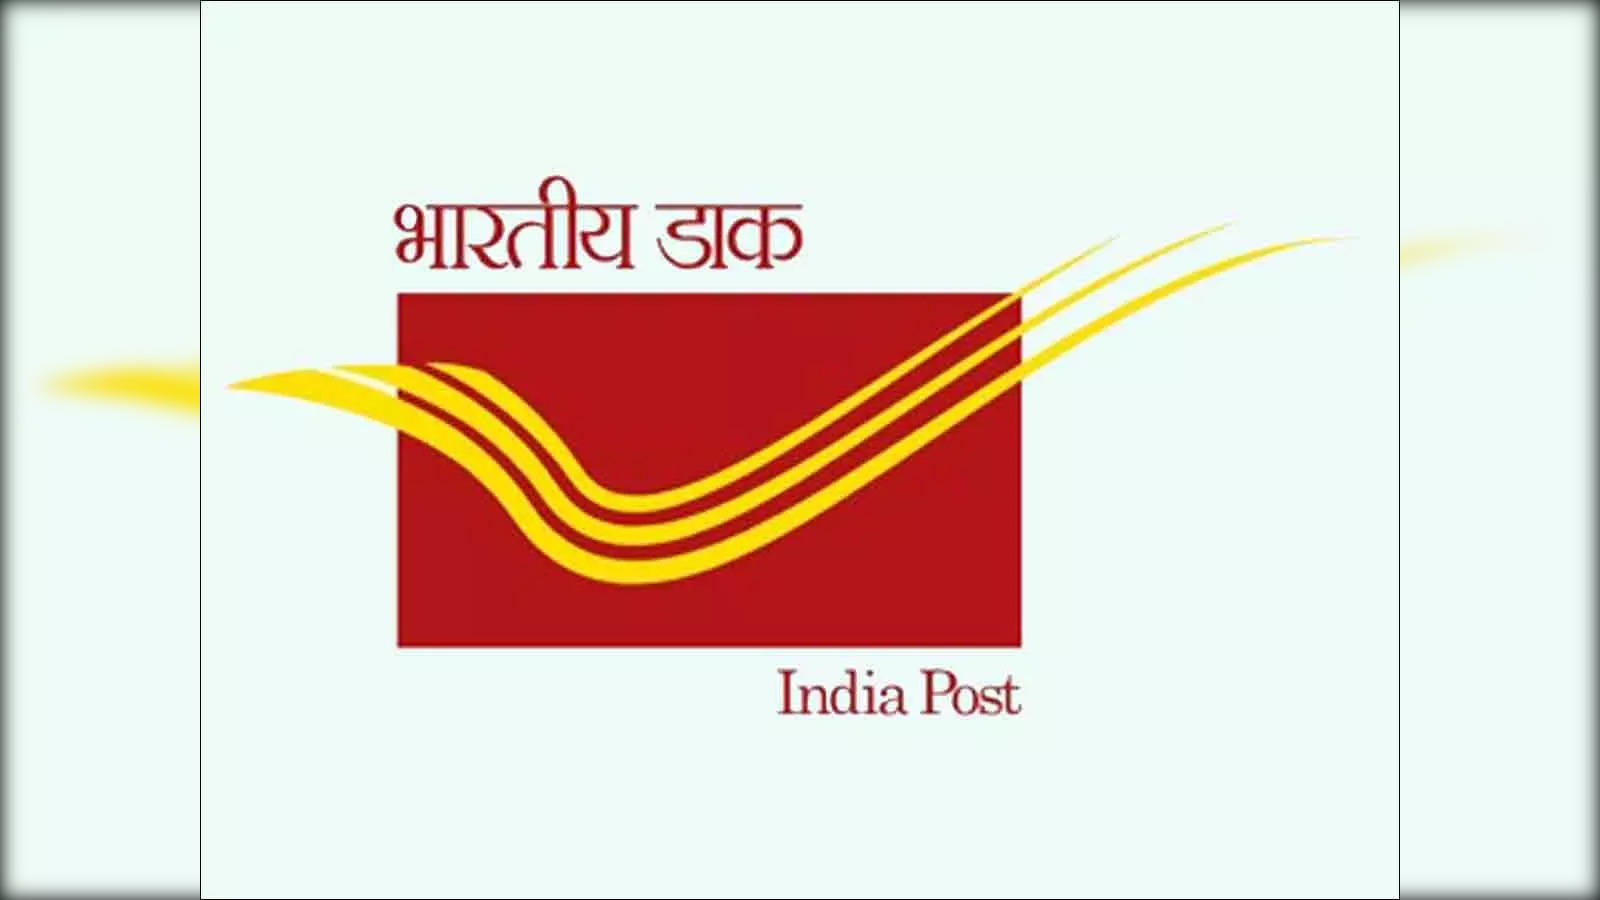 Post office Recruitment Across India for 38,926 Vacancies, Click Here to  Apply